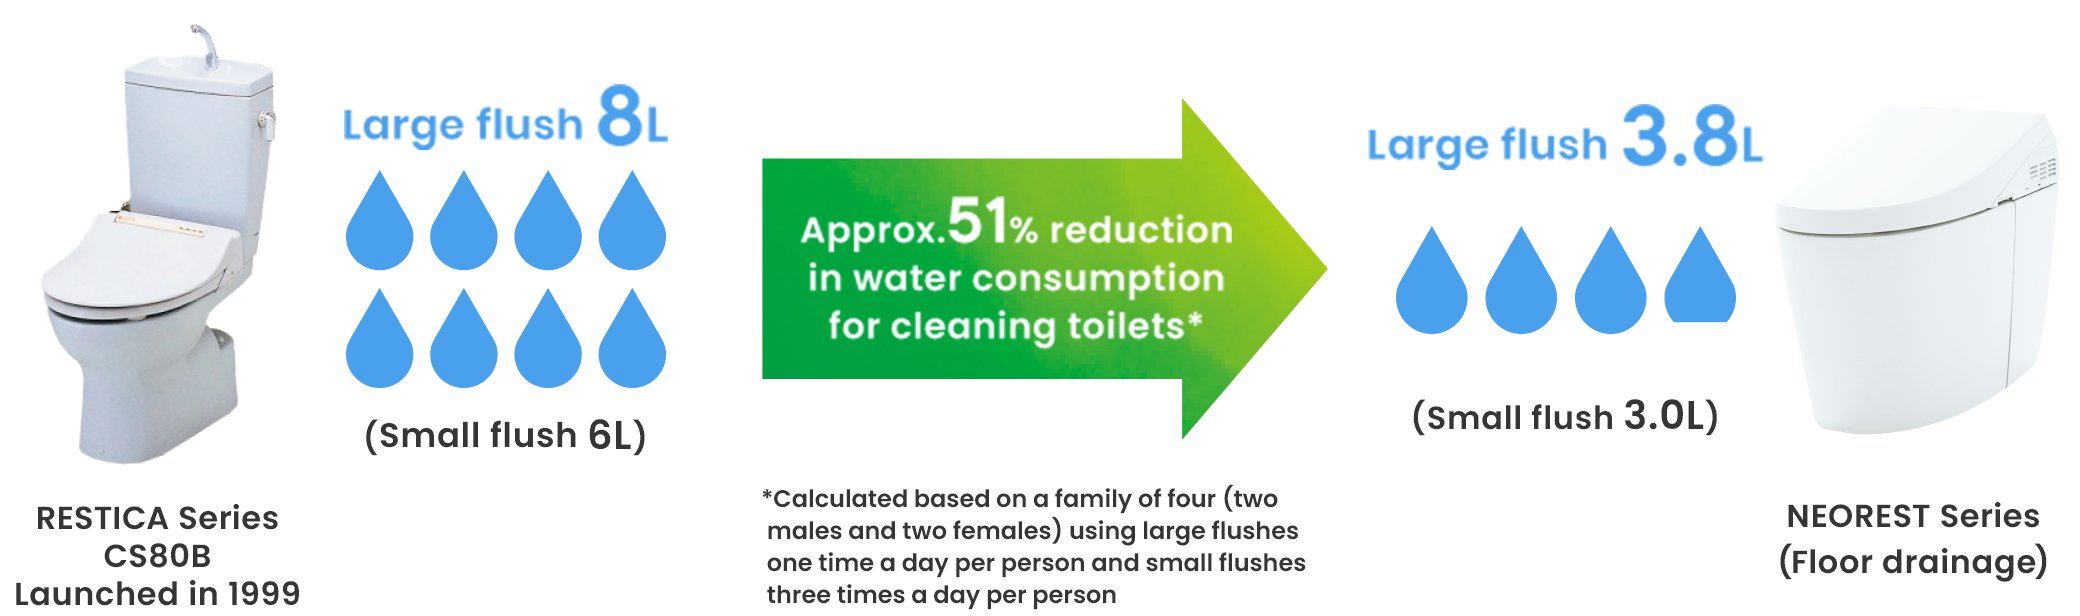 Based on a typical family structure (2 males and 2 females), 51% reduction in water consumption between the product launched in 1999 and the current Neorest, resulted 3.8 litres for the large flushes (3 litres for the small flushes).